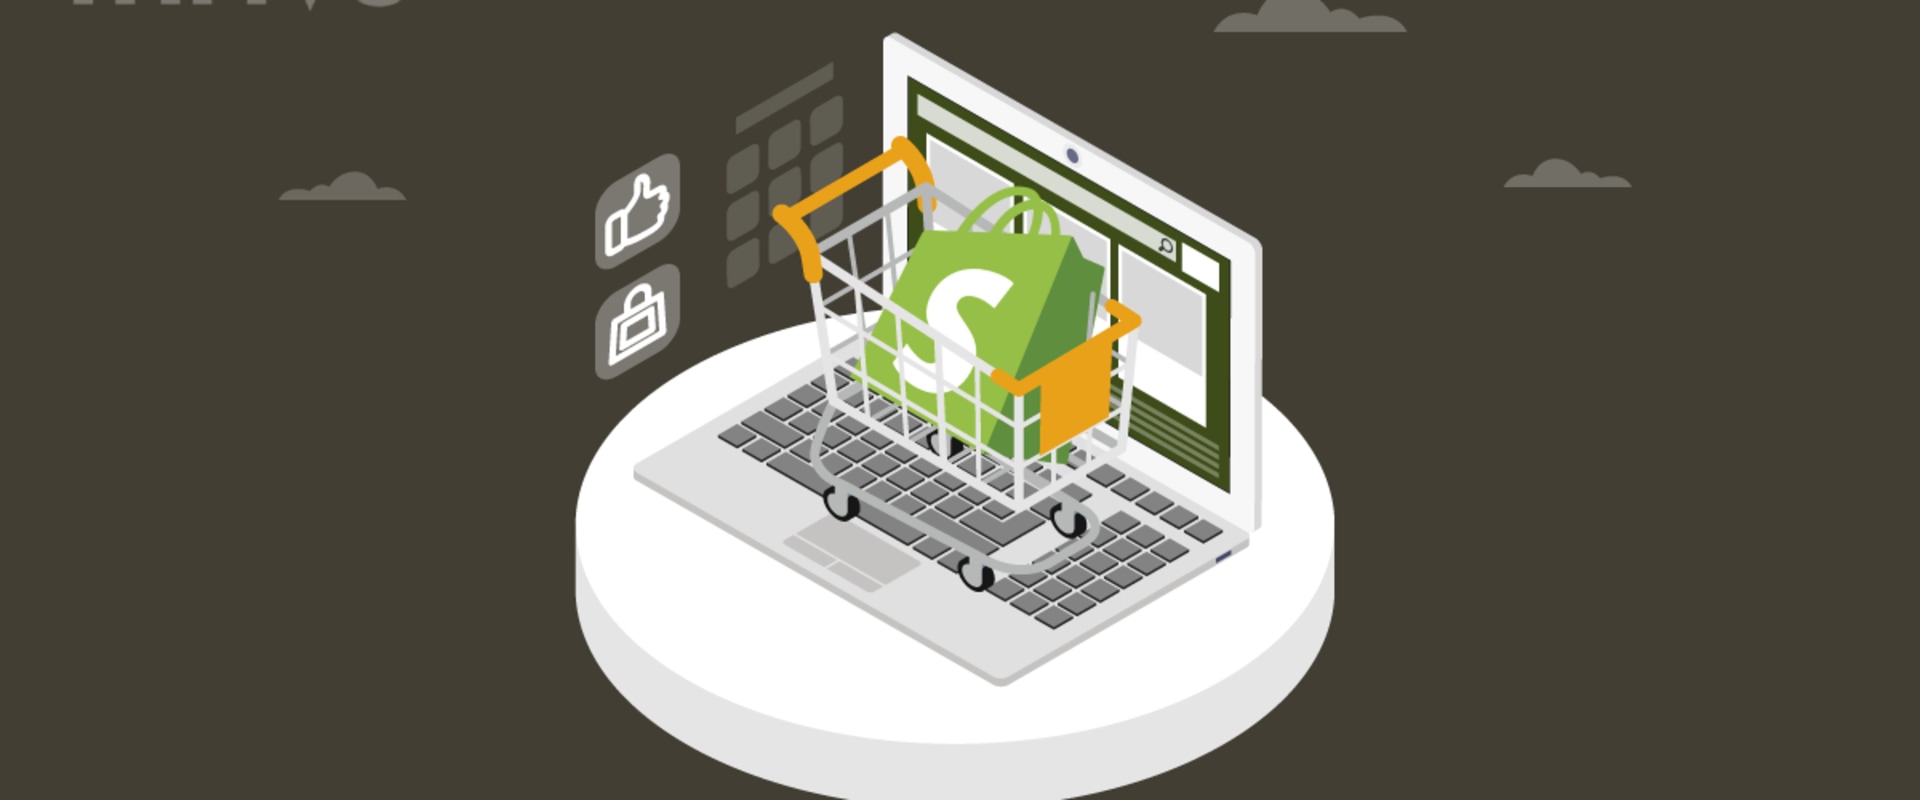 The Benefits of Using Shopify for Your Business